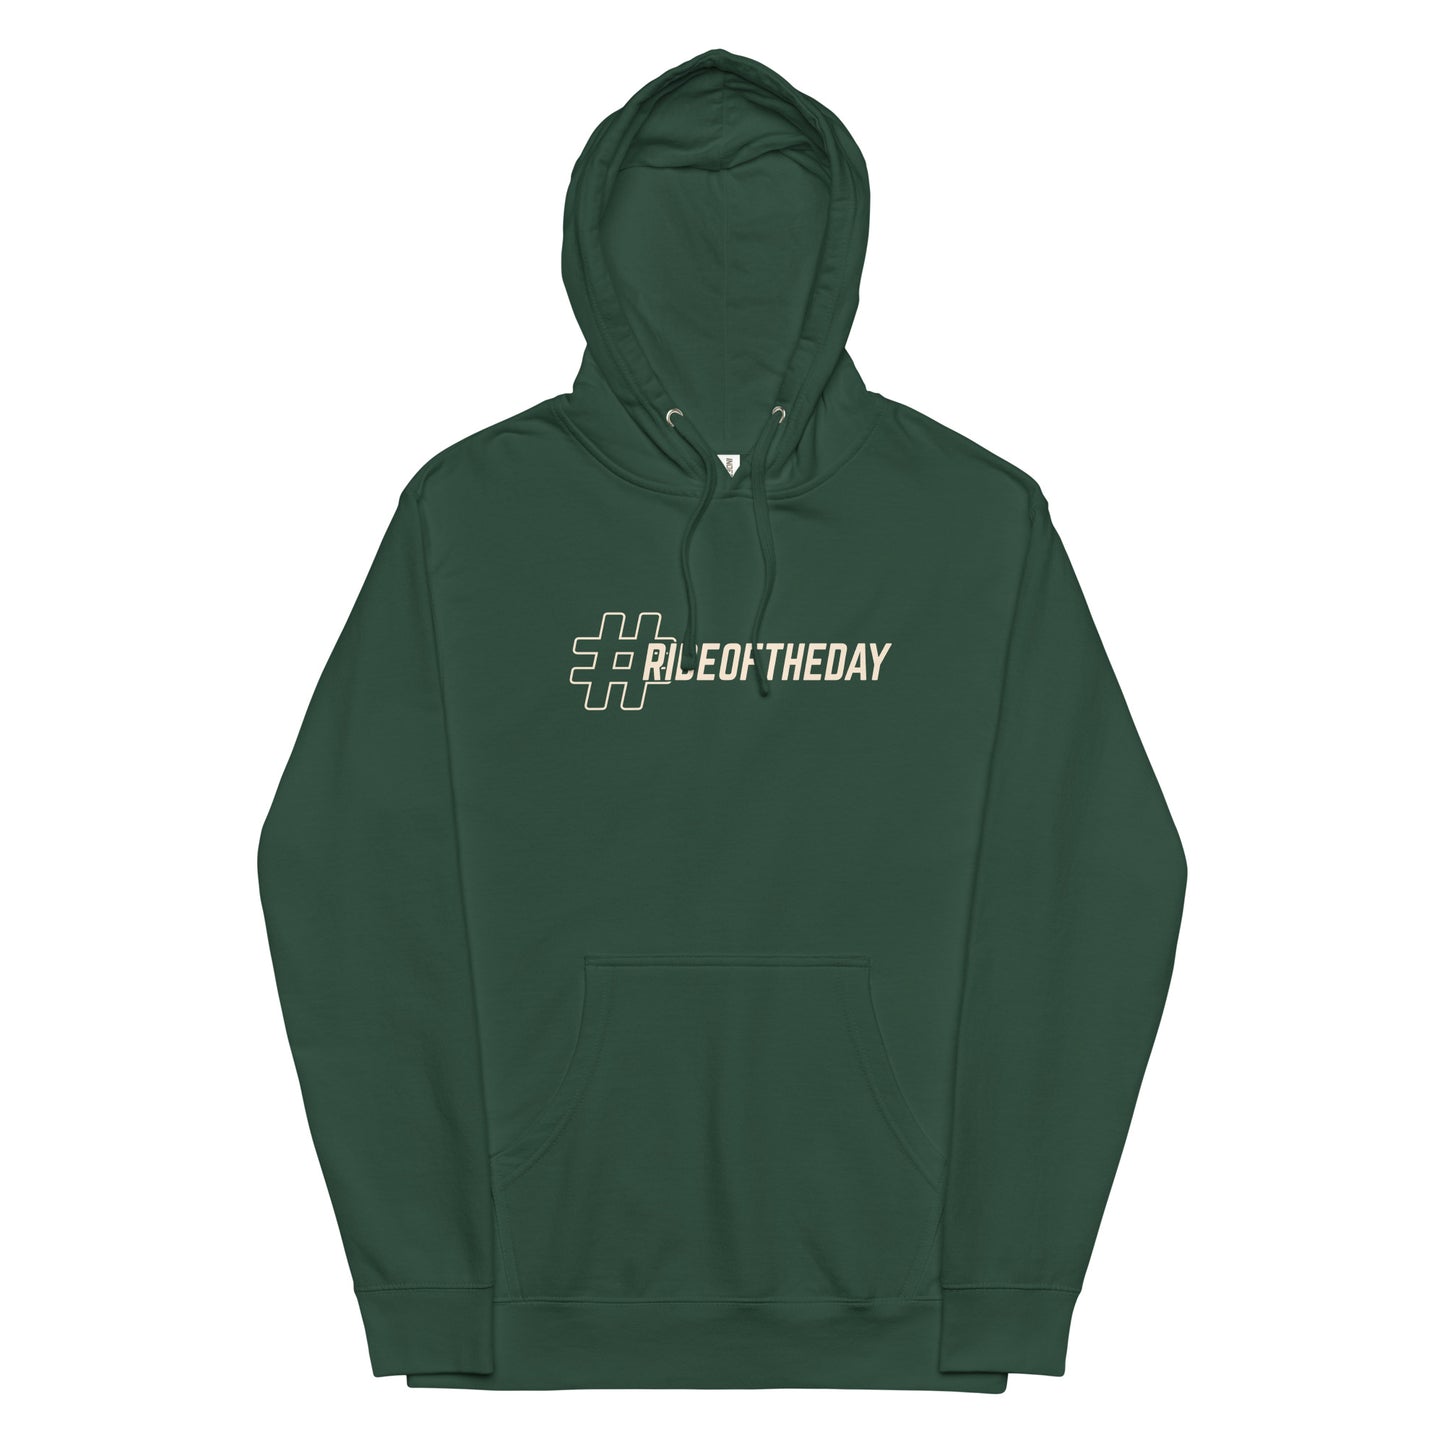 Ride of the Day Hoodie